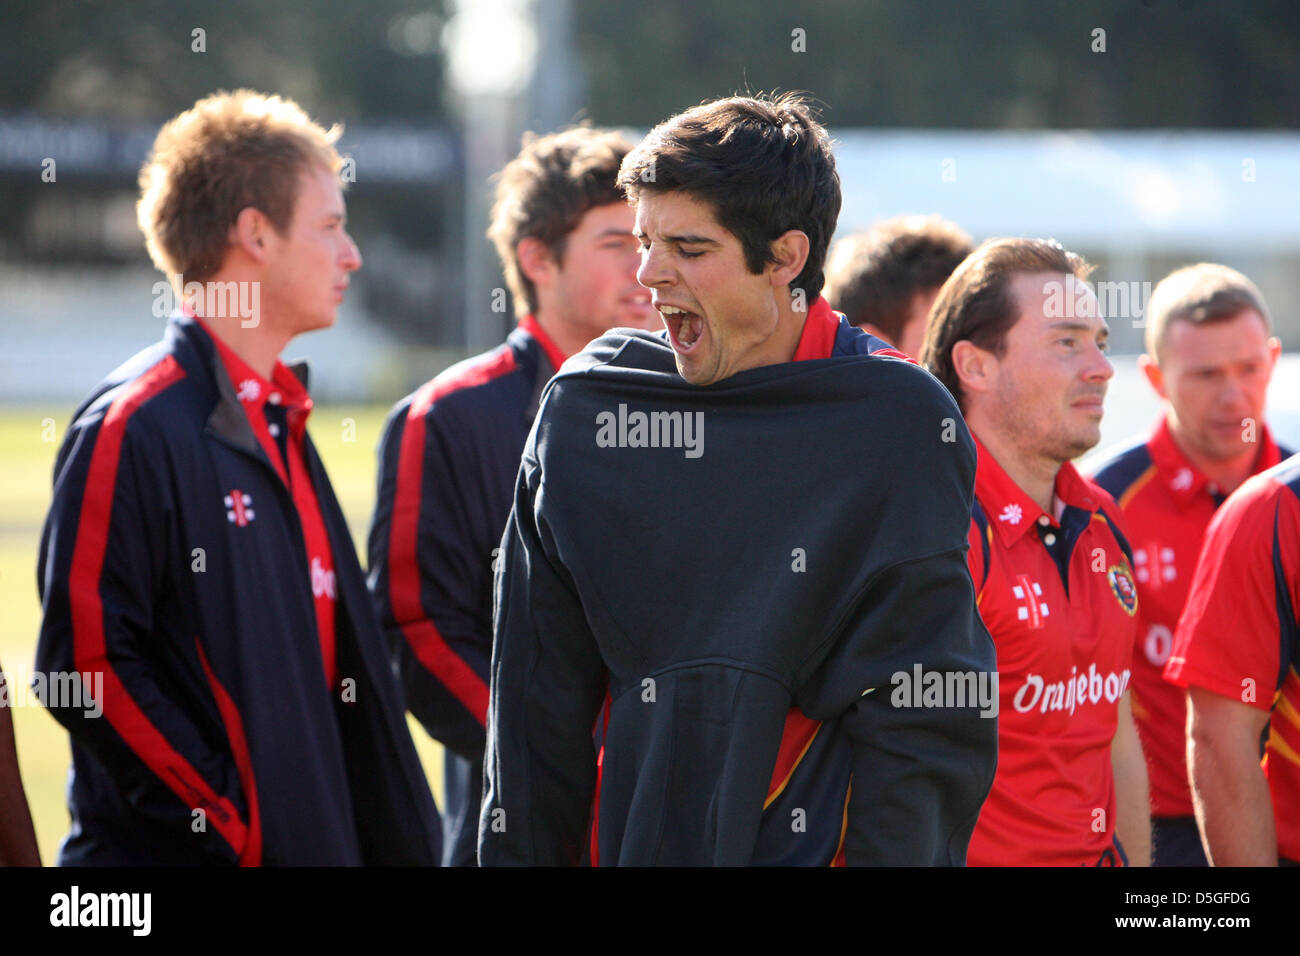 Chelmsford, UK. 2nd April 2013. Alastair Cook of Essex County Cricket during the Essex County Cricket Team Media Day from the The County Cricket Ground. Credit: Action Plus Sports Images / Alamy Live News Stock Photo